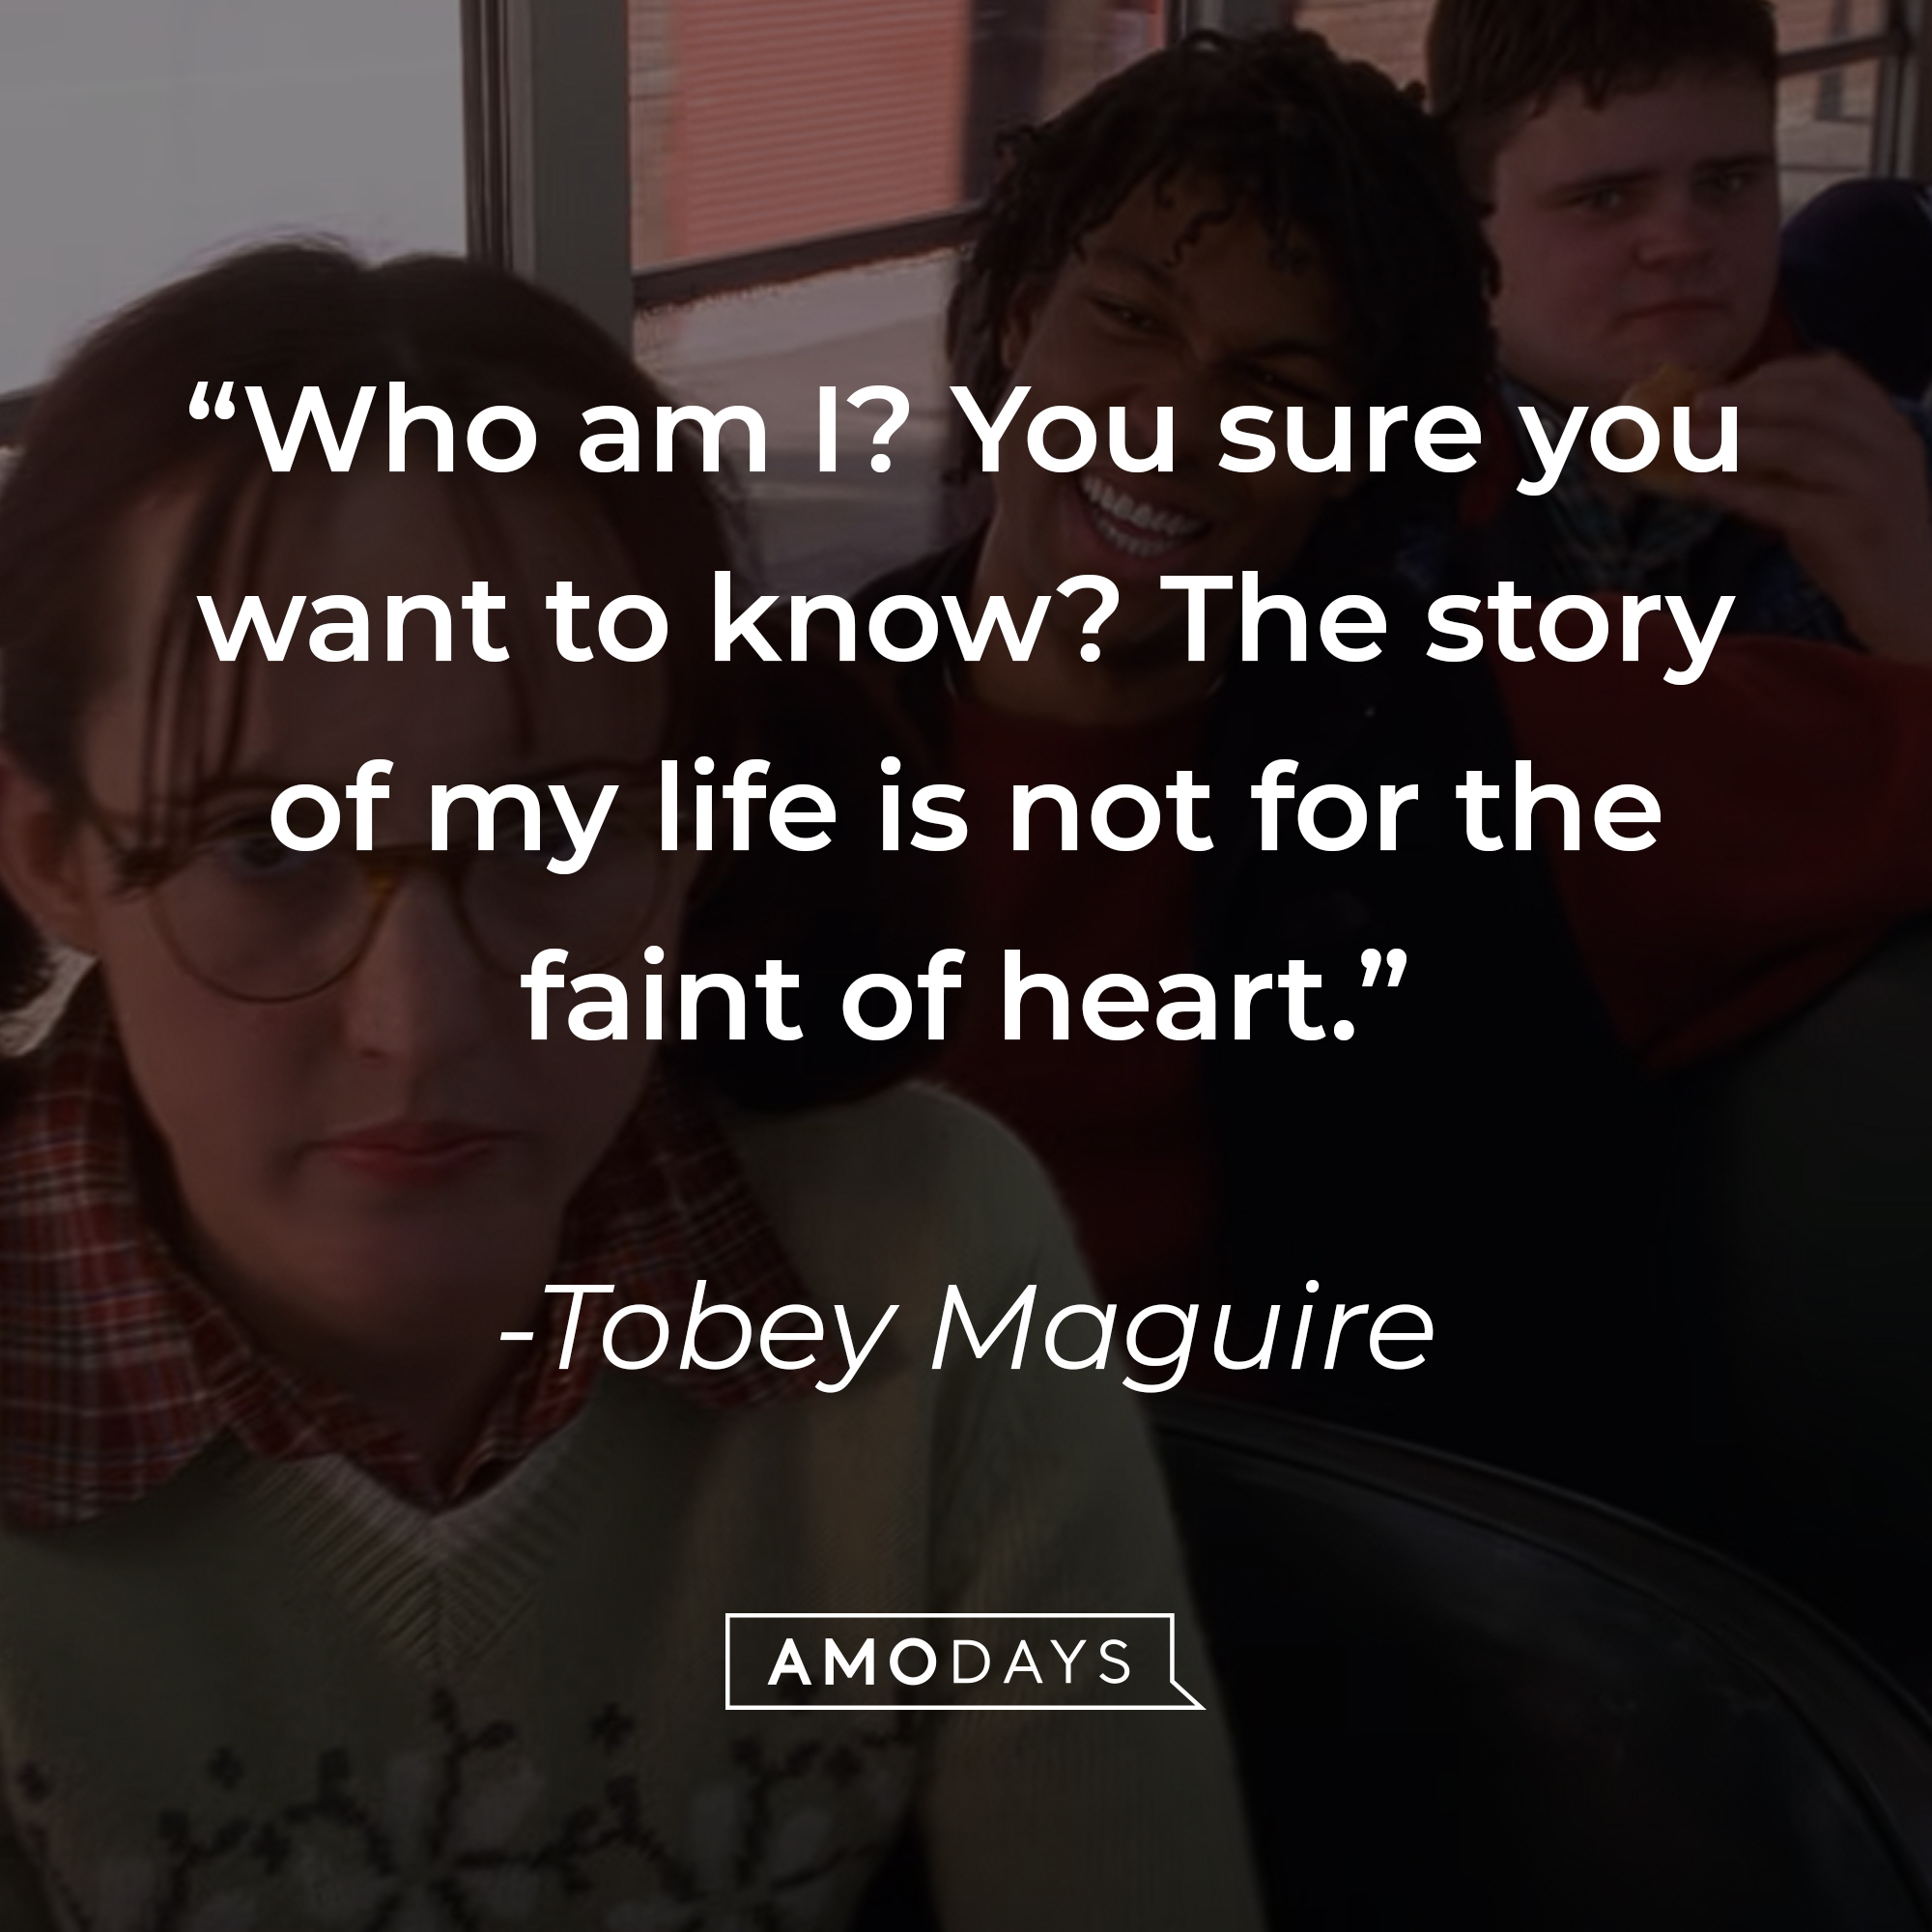 Tobey Maguire's quote: “Who am I? You sure you want to know? The story of my life is not for the faint of heart.” | Source: youtube.com/sonypictures